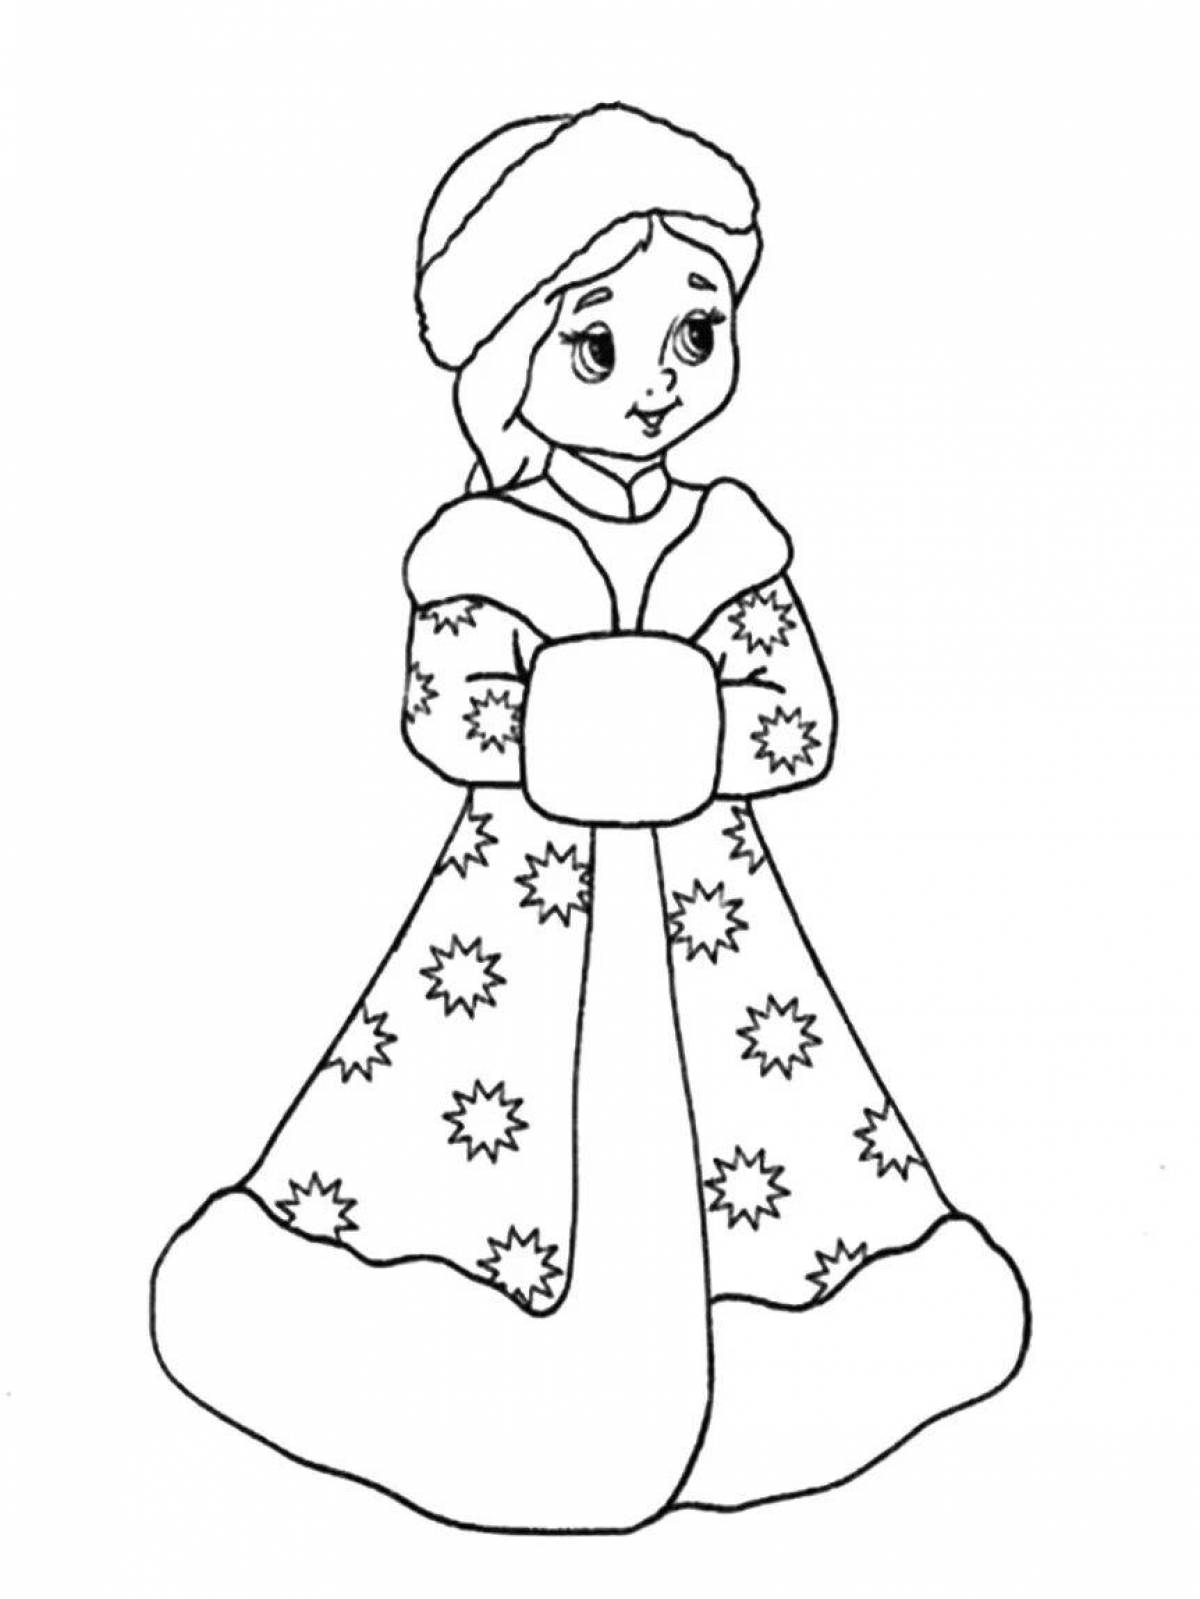 Glorious snow maiden coloring book for kids